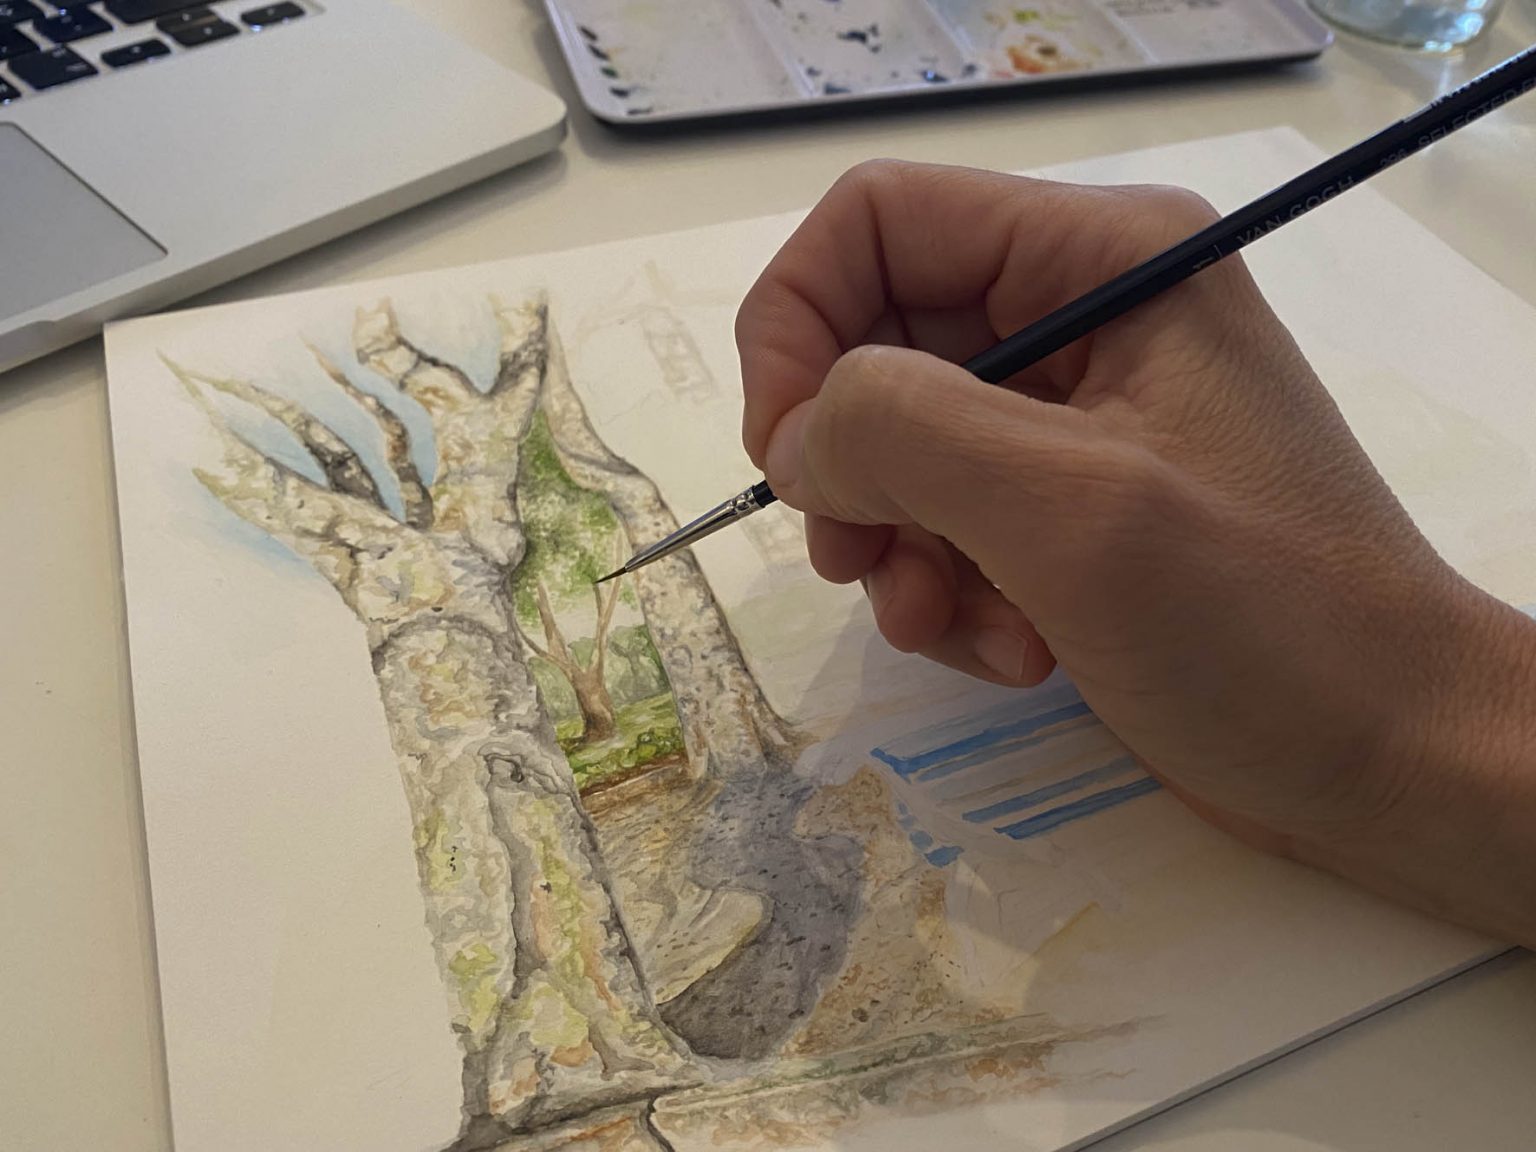 Painting the Largo da Assunção trees. Initial sketches were taken on location and then painting happened in studio.